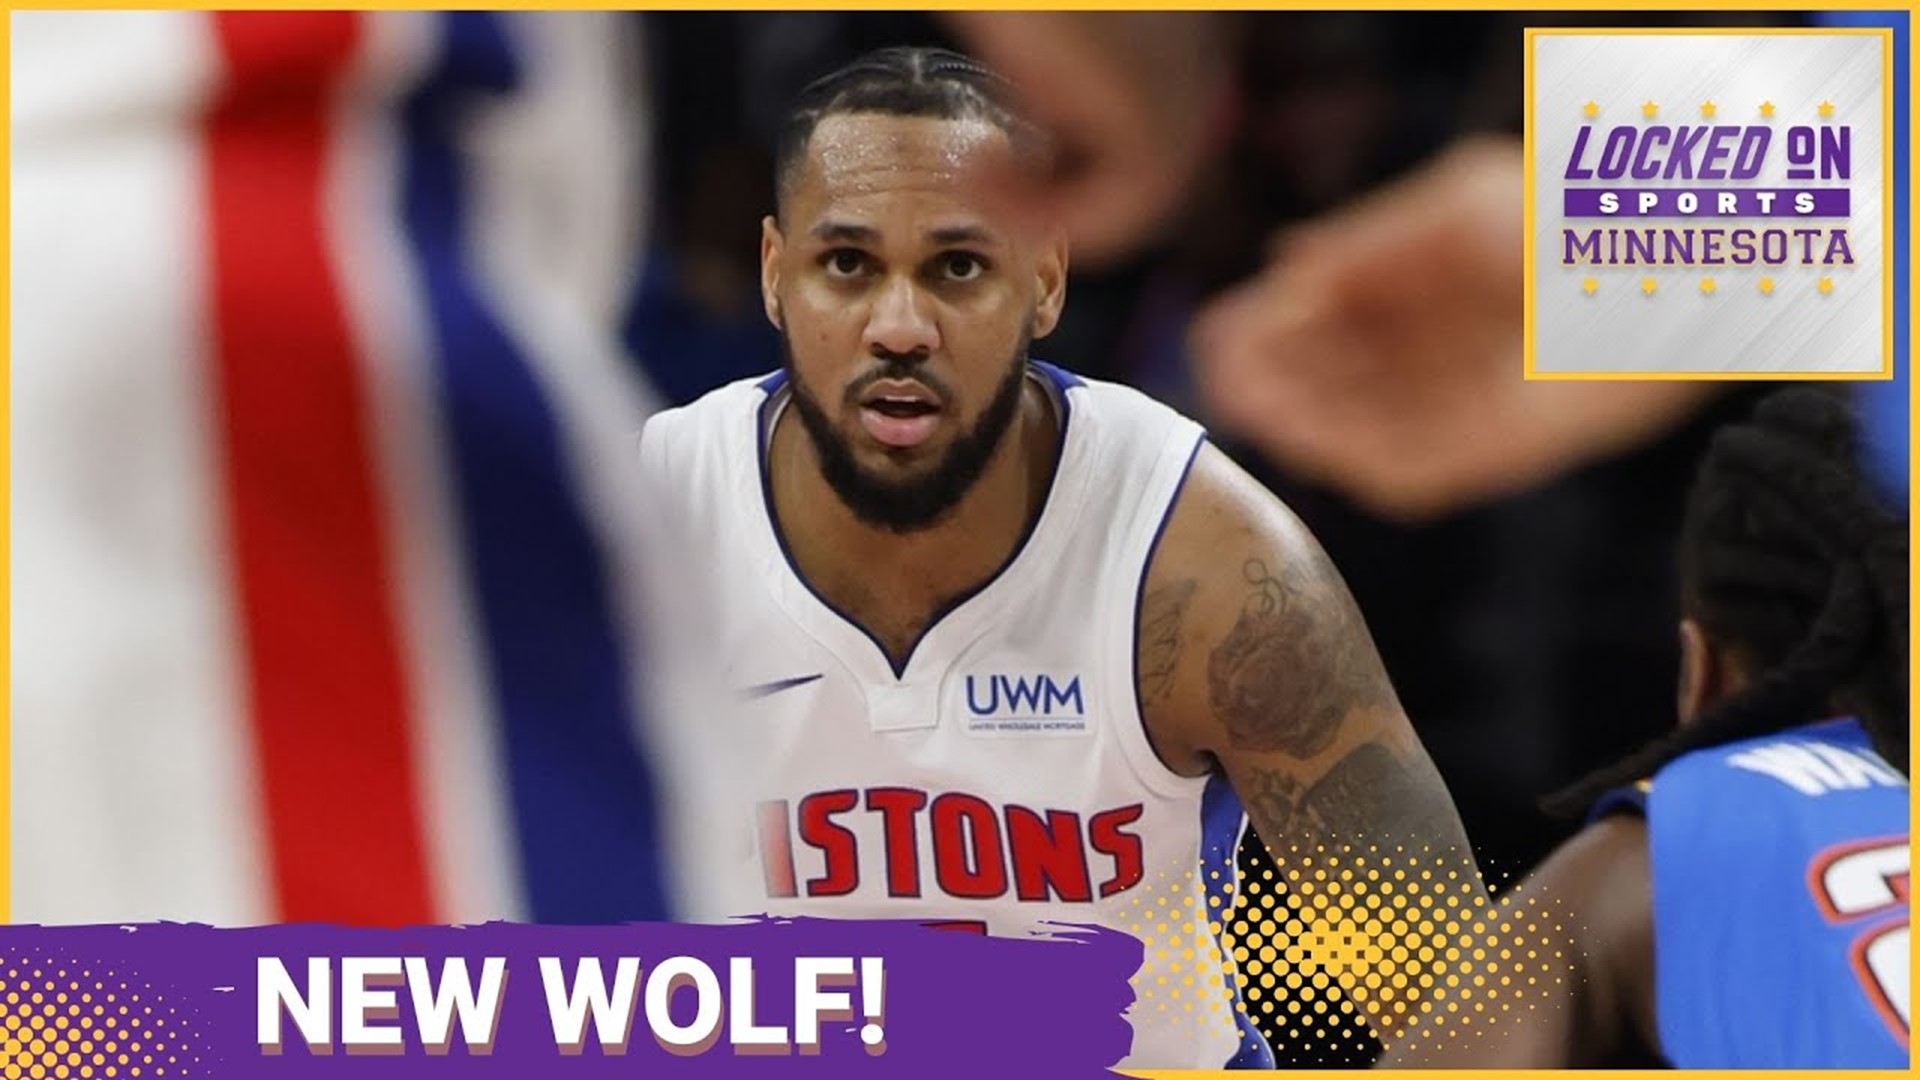 The Minnesota Timberwolves Made a WINNING Trade For Monte Morris. Locked On Sports MN Roundtable